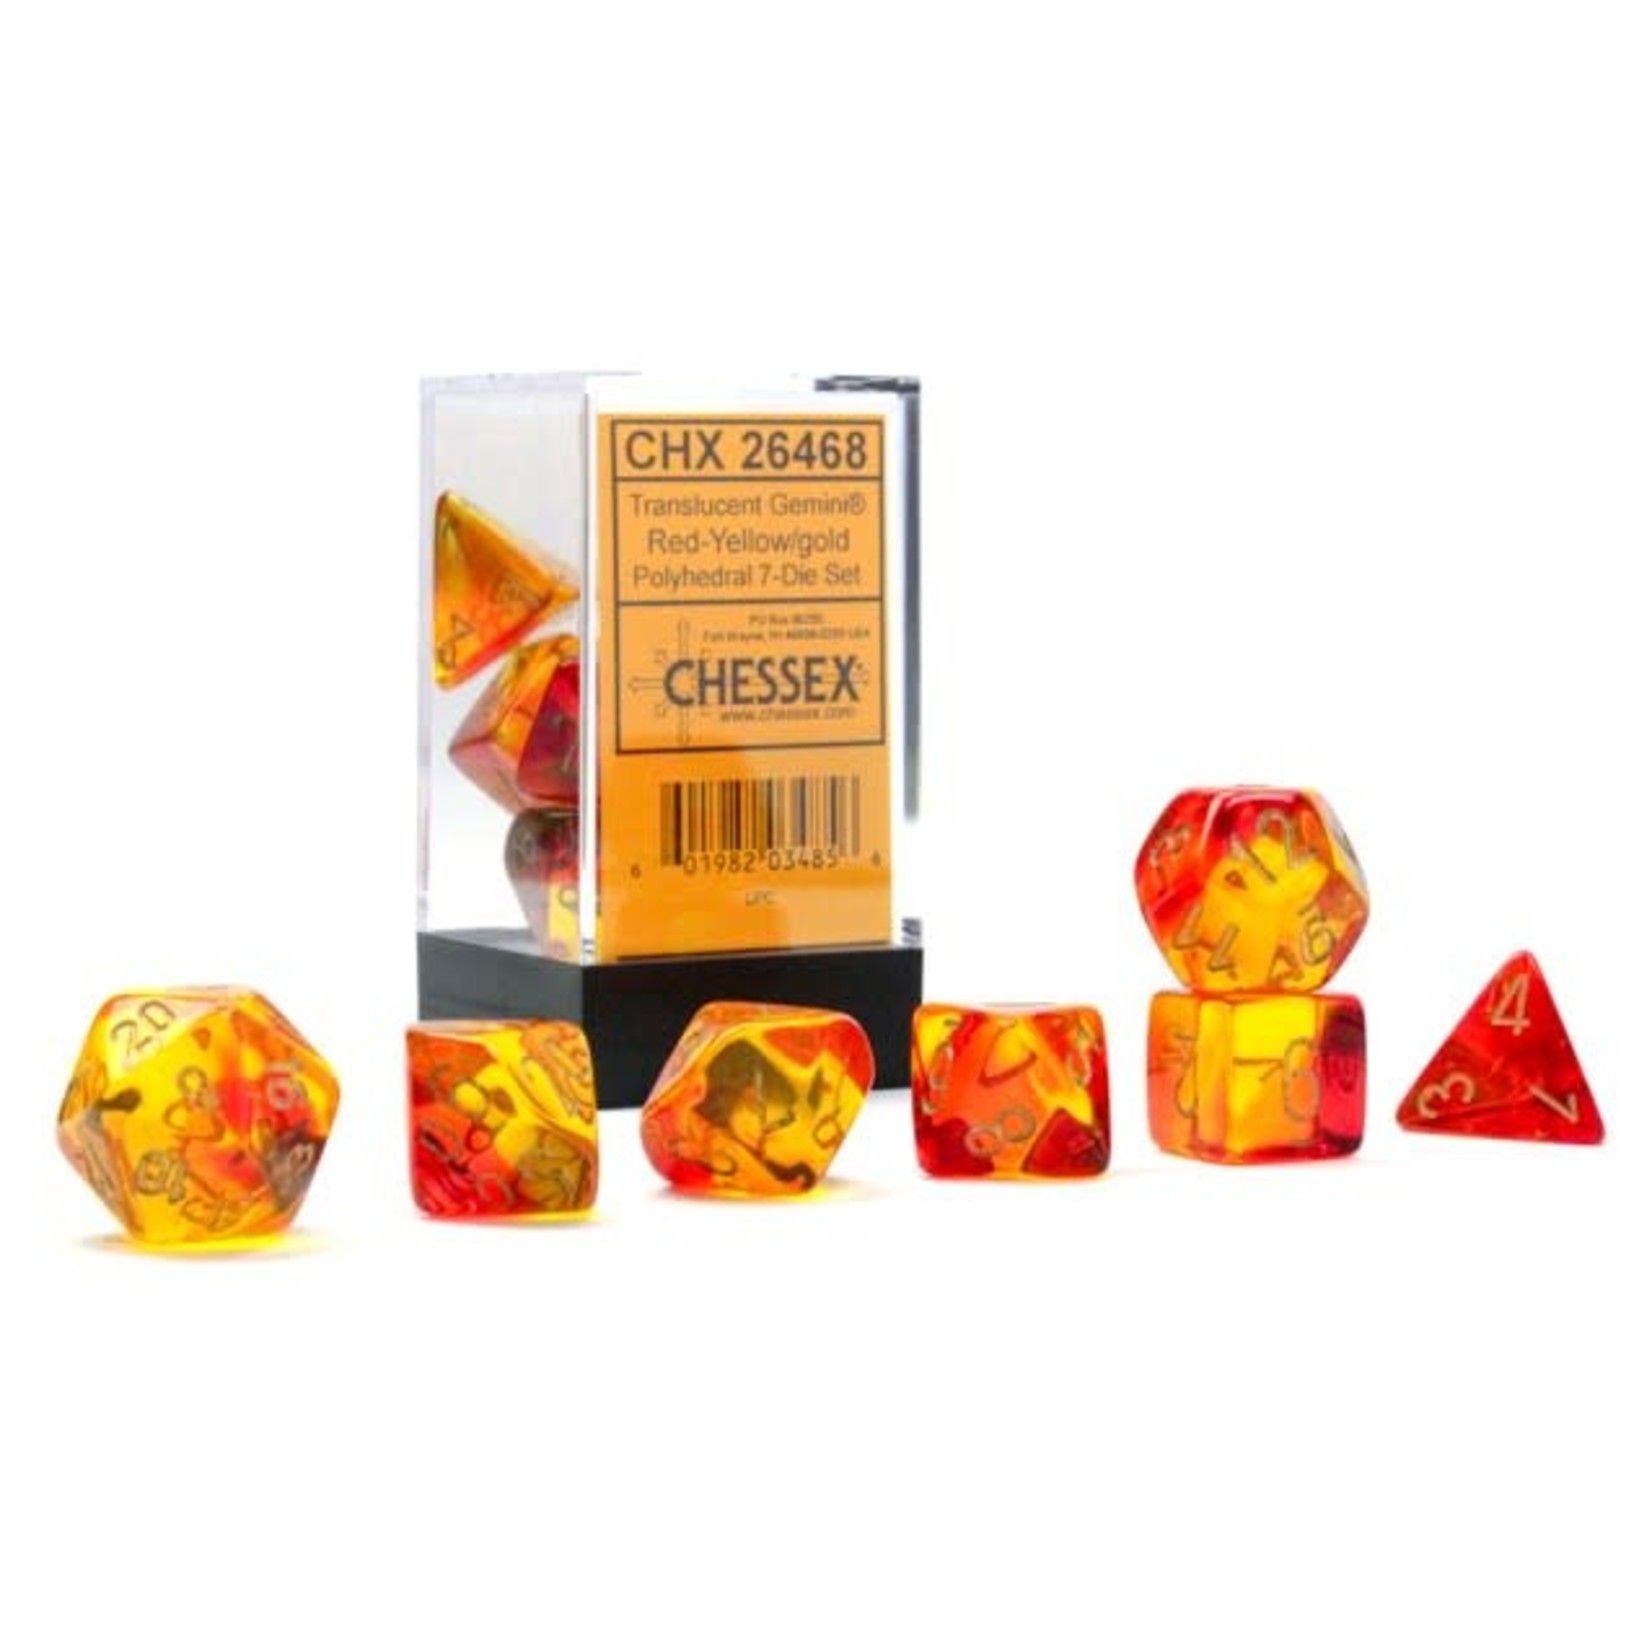 Chessex Gemini Translucent Red/Yellow with Gold 7-Set 26468